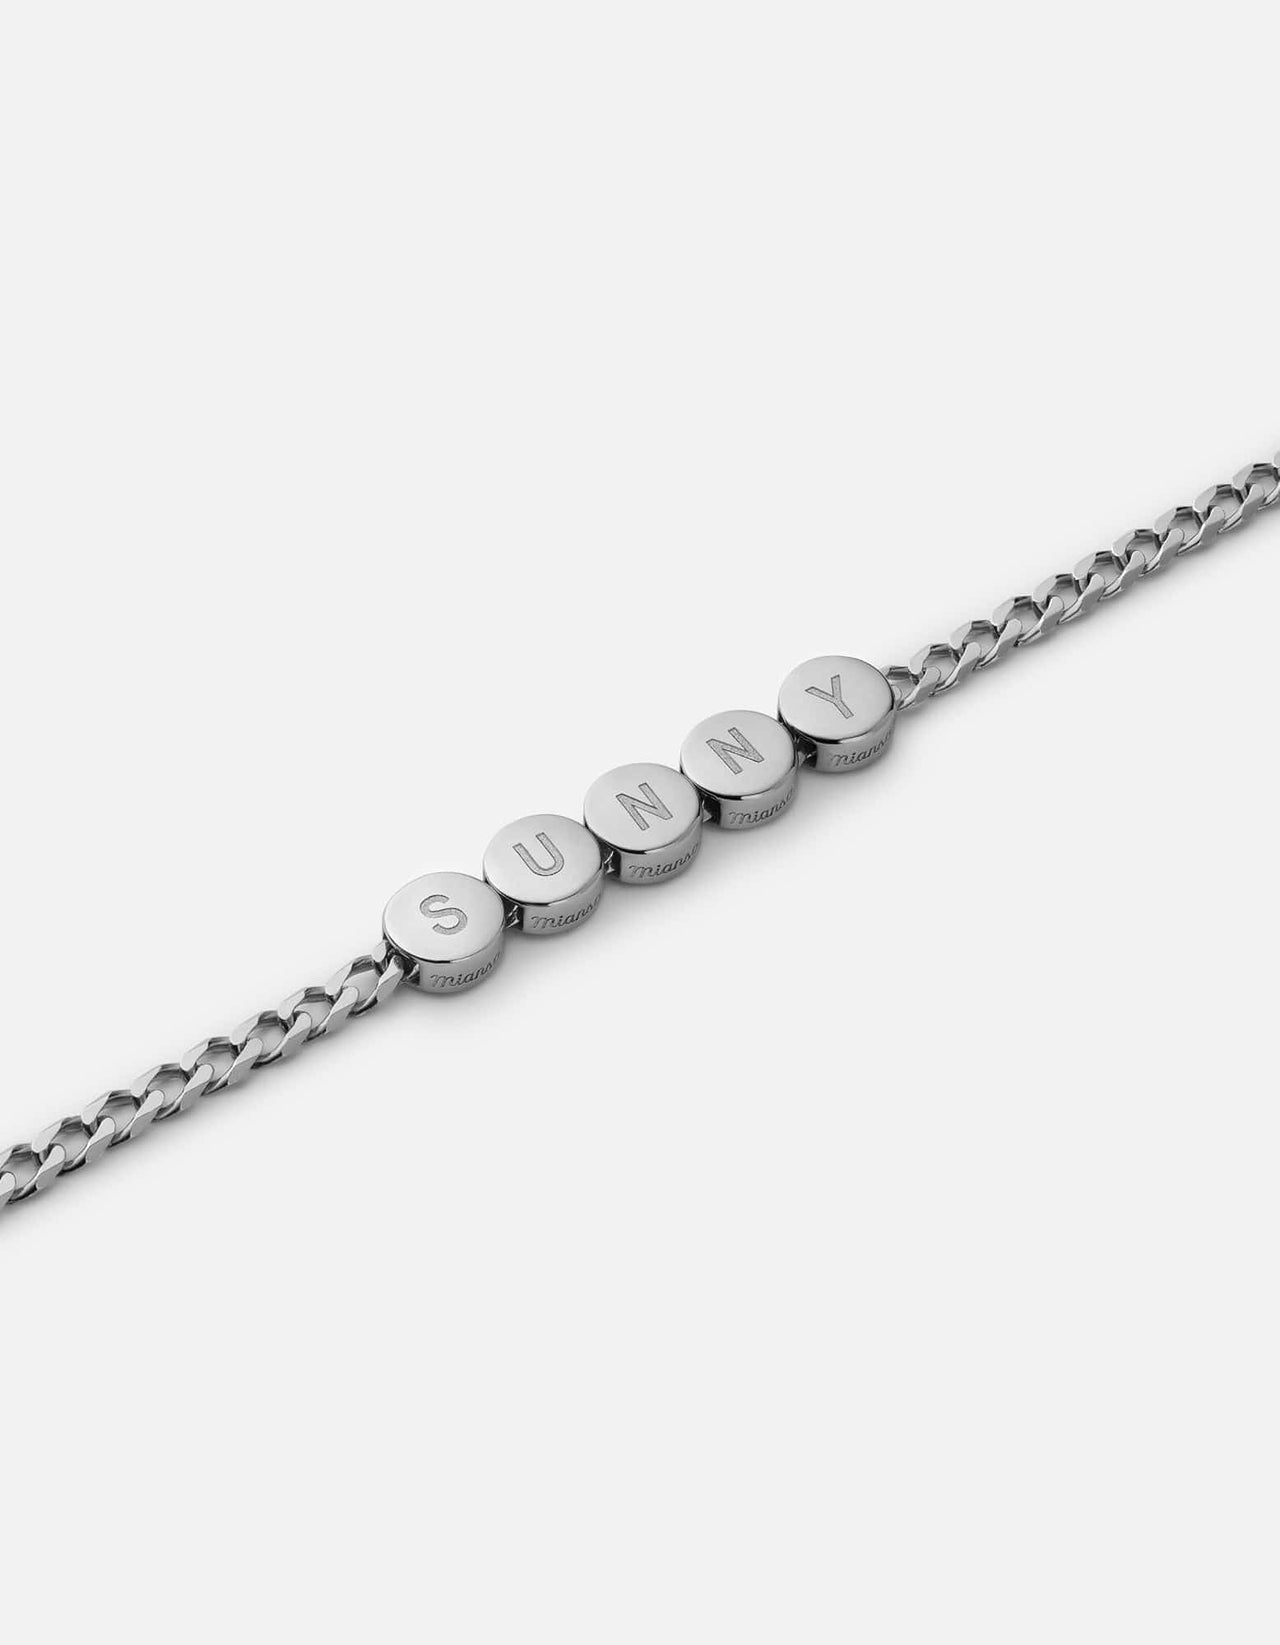 Miansai Men's Volcan Type Chain Necklace, Sterling Silver, Size 24 in.